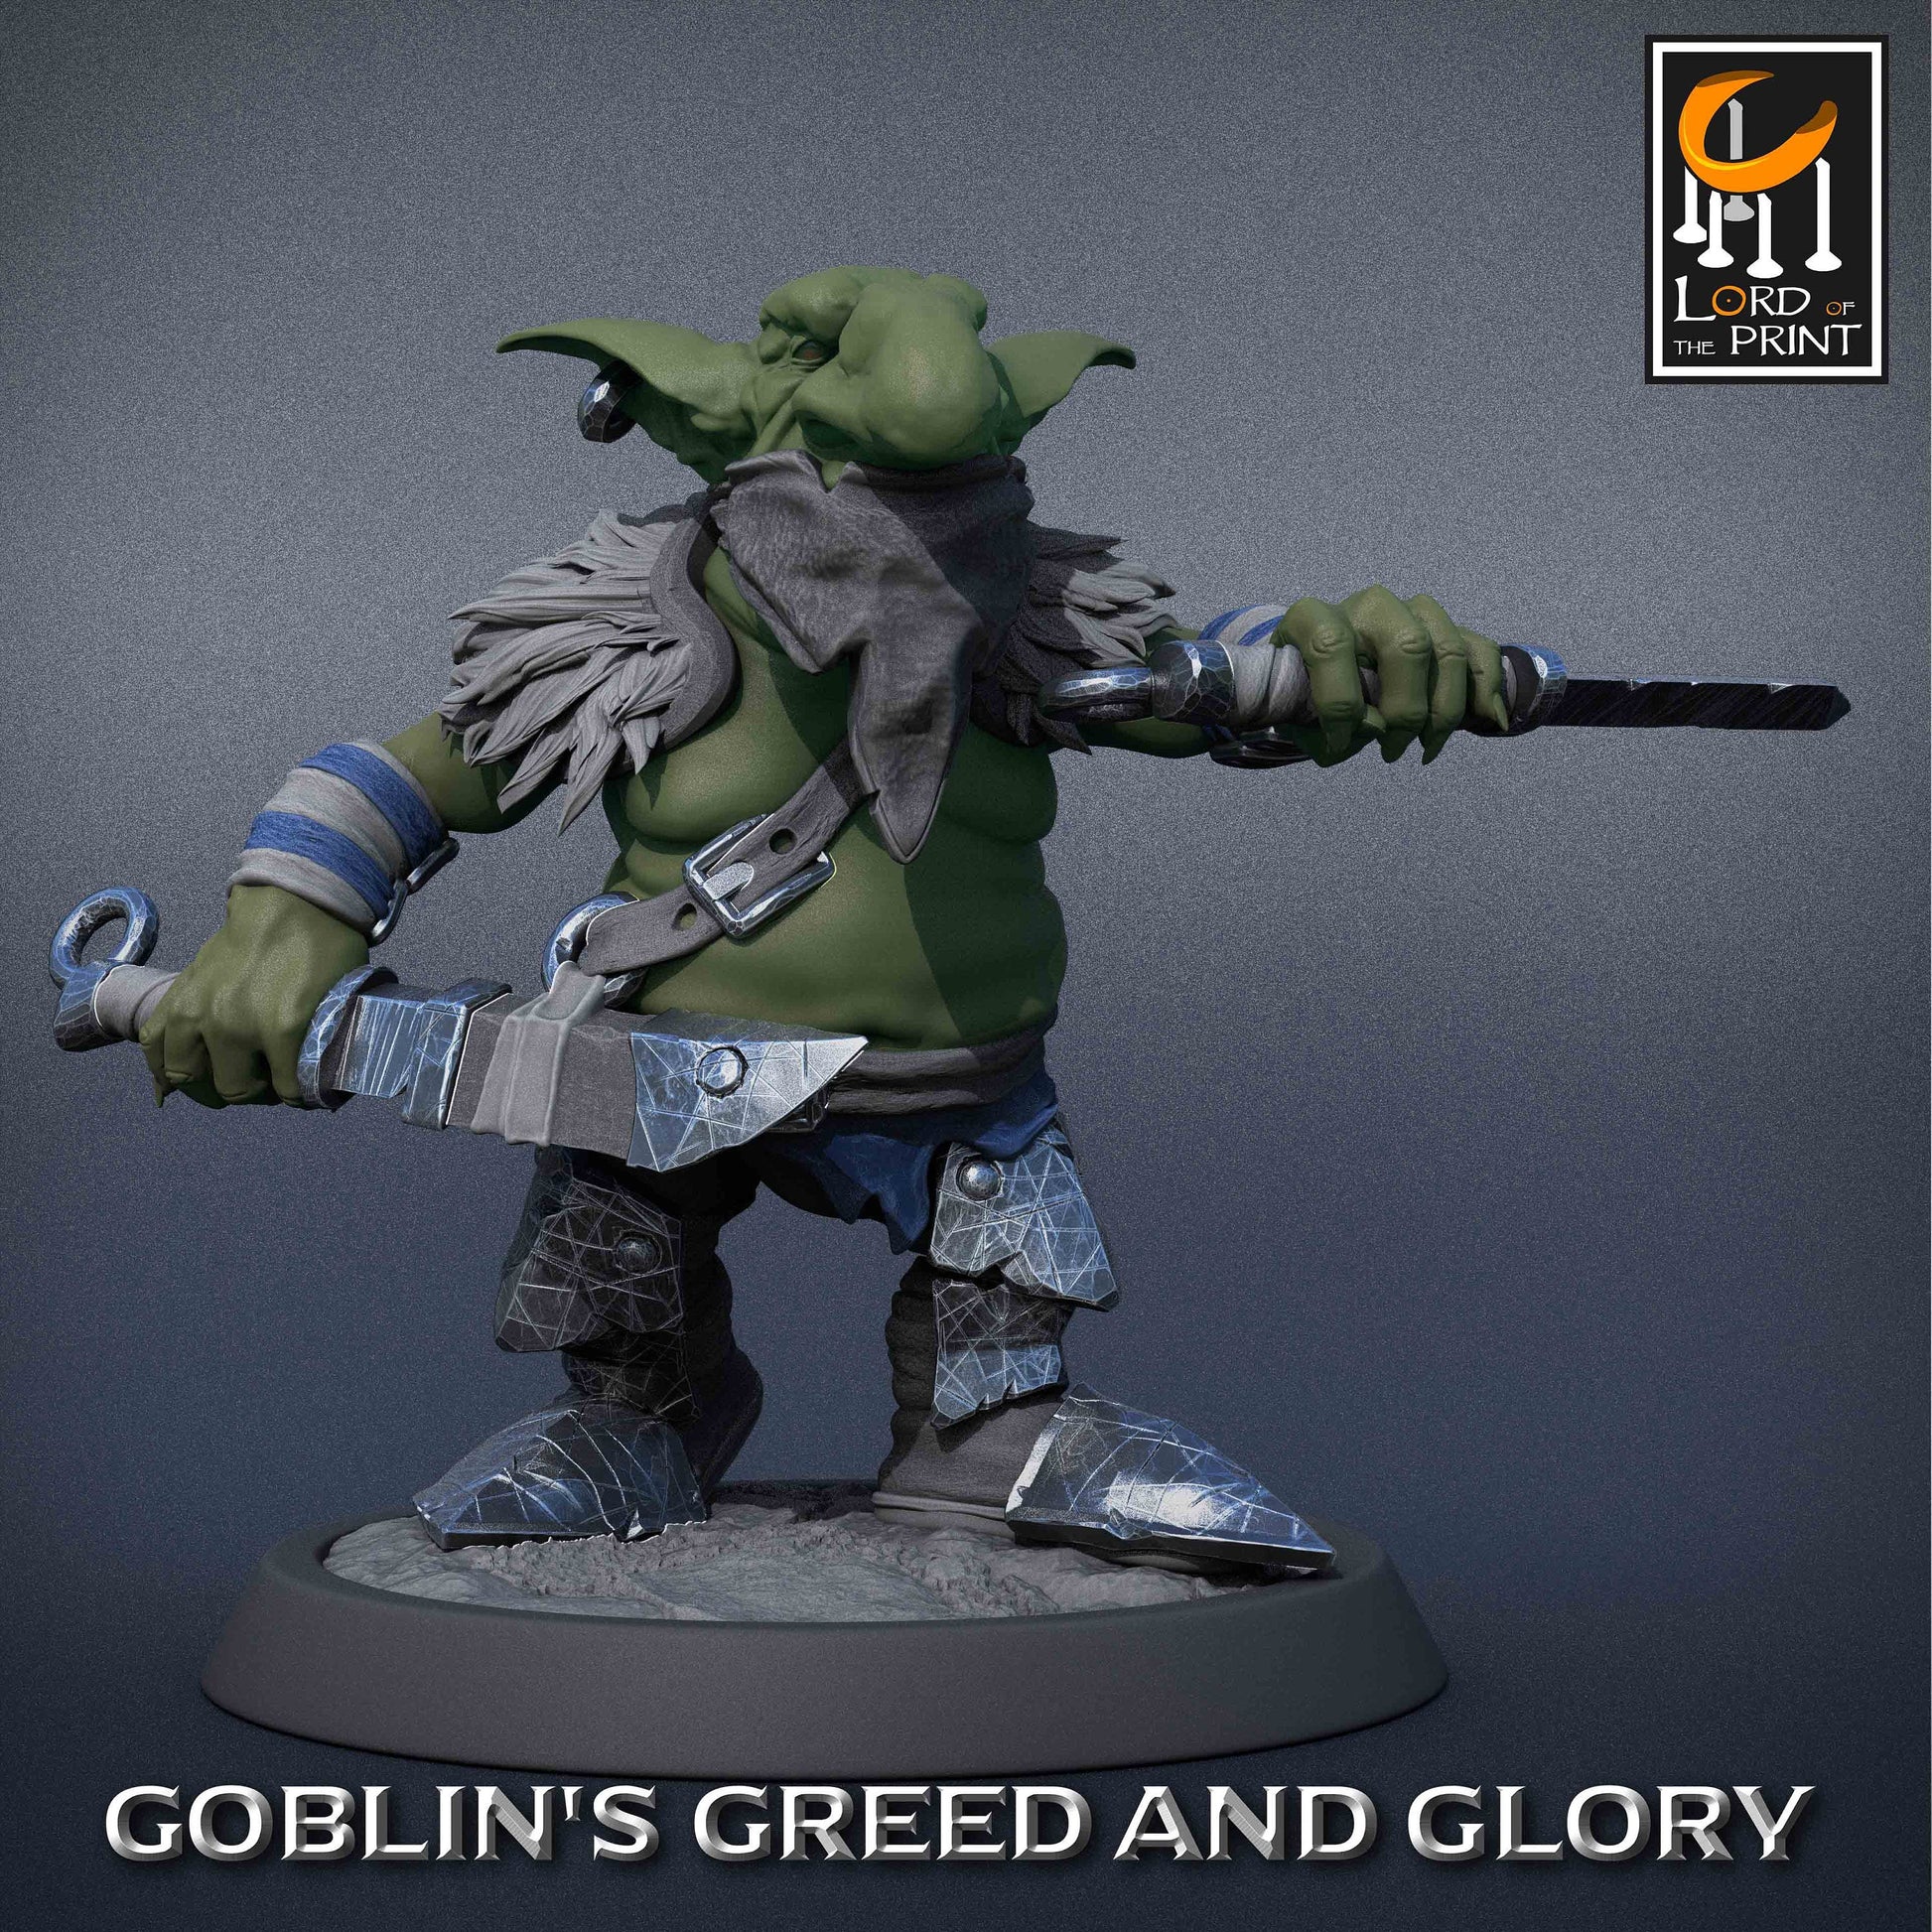 Goblin Rogue - Lord of the Print Miniature | Dungeons & Dragons | Pathfinder | Tabletop